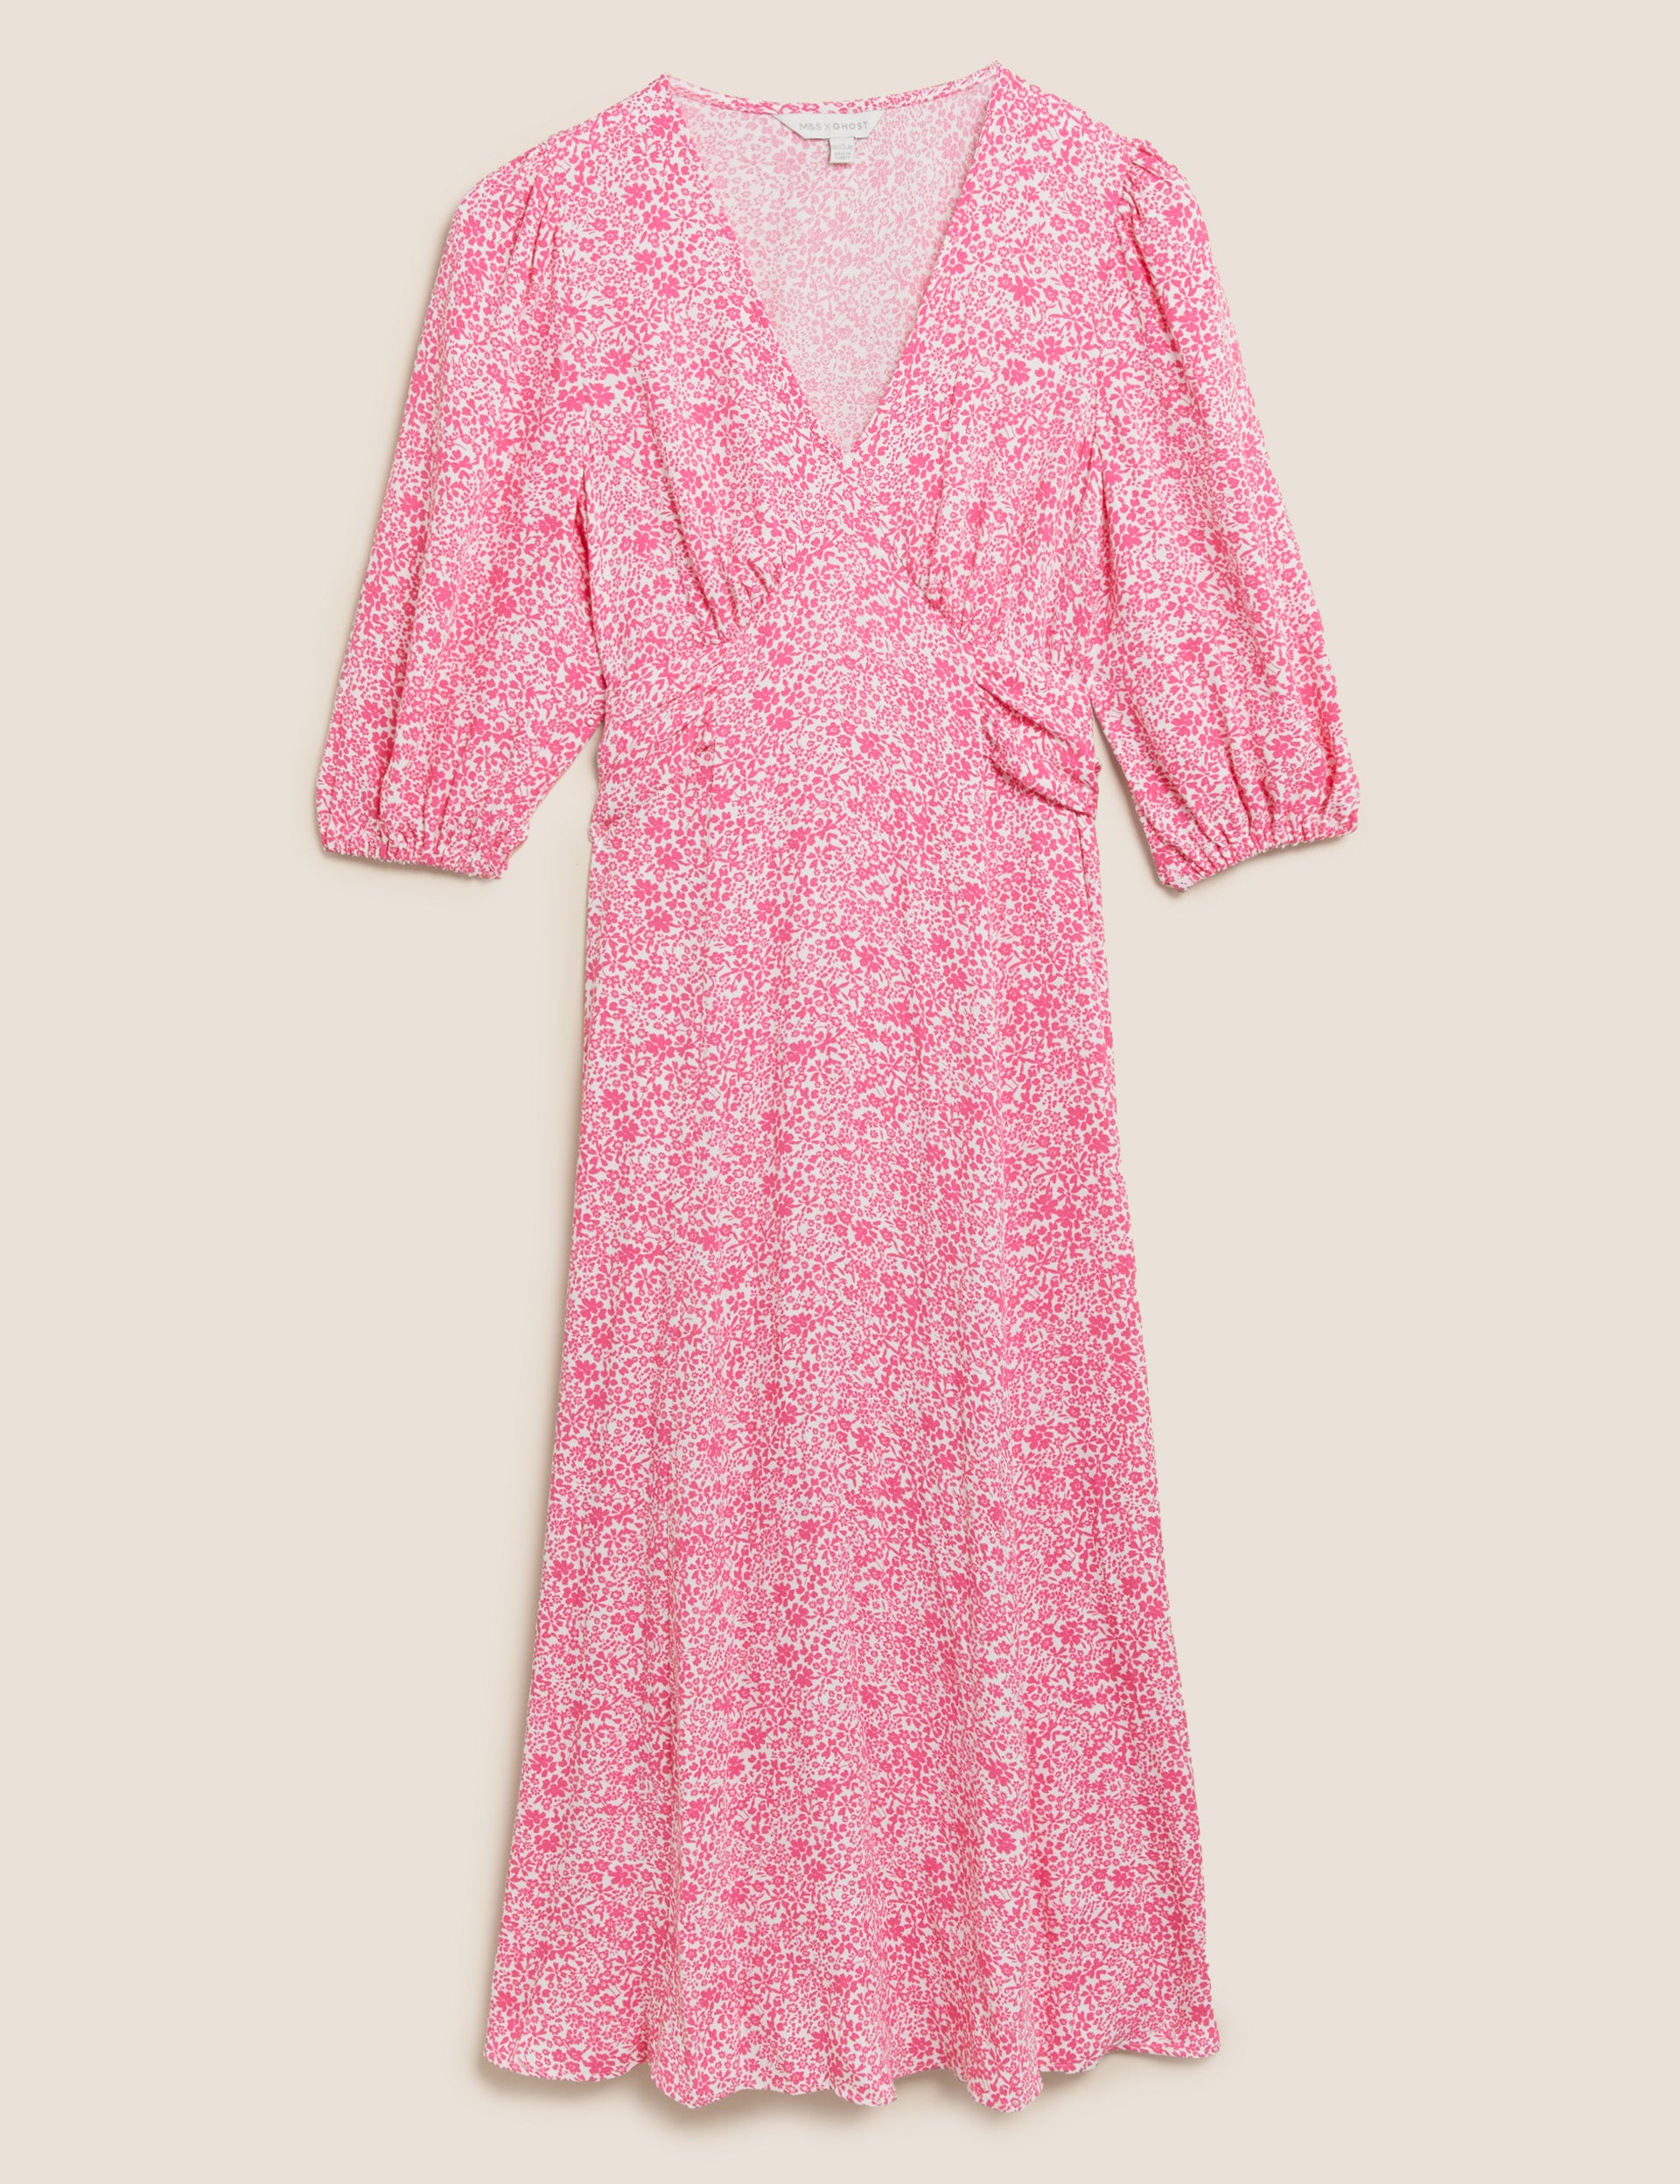 M&S X Ghost Floral V Neck Midi Dress product image